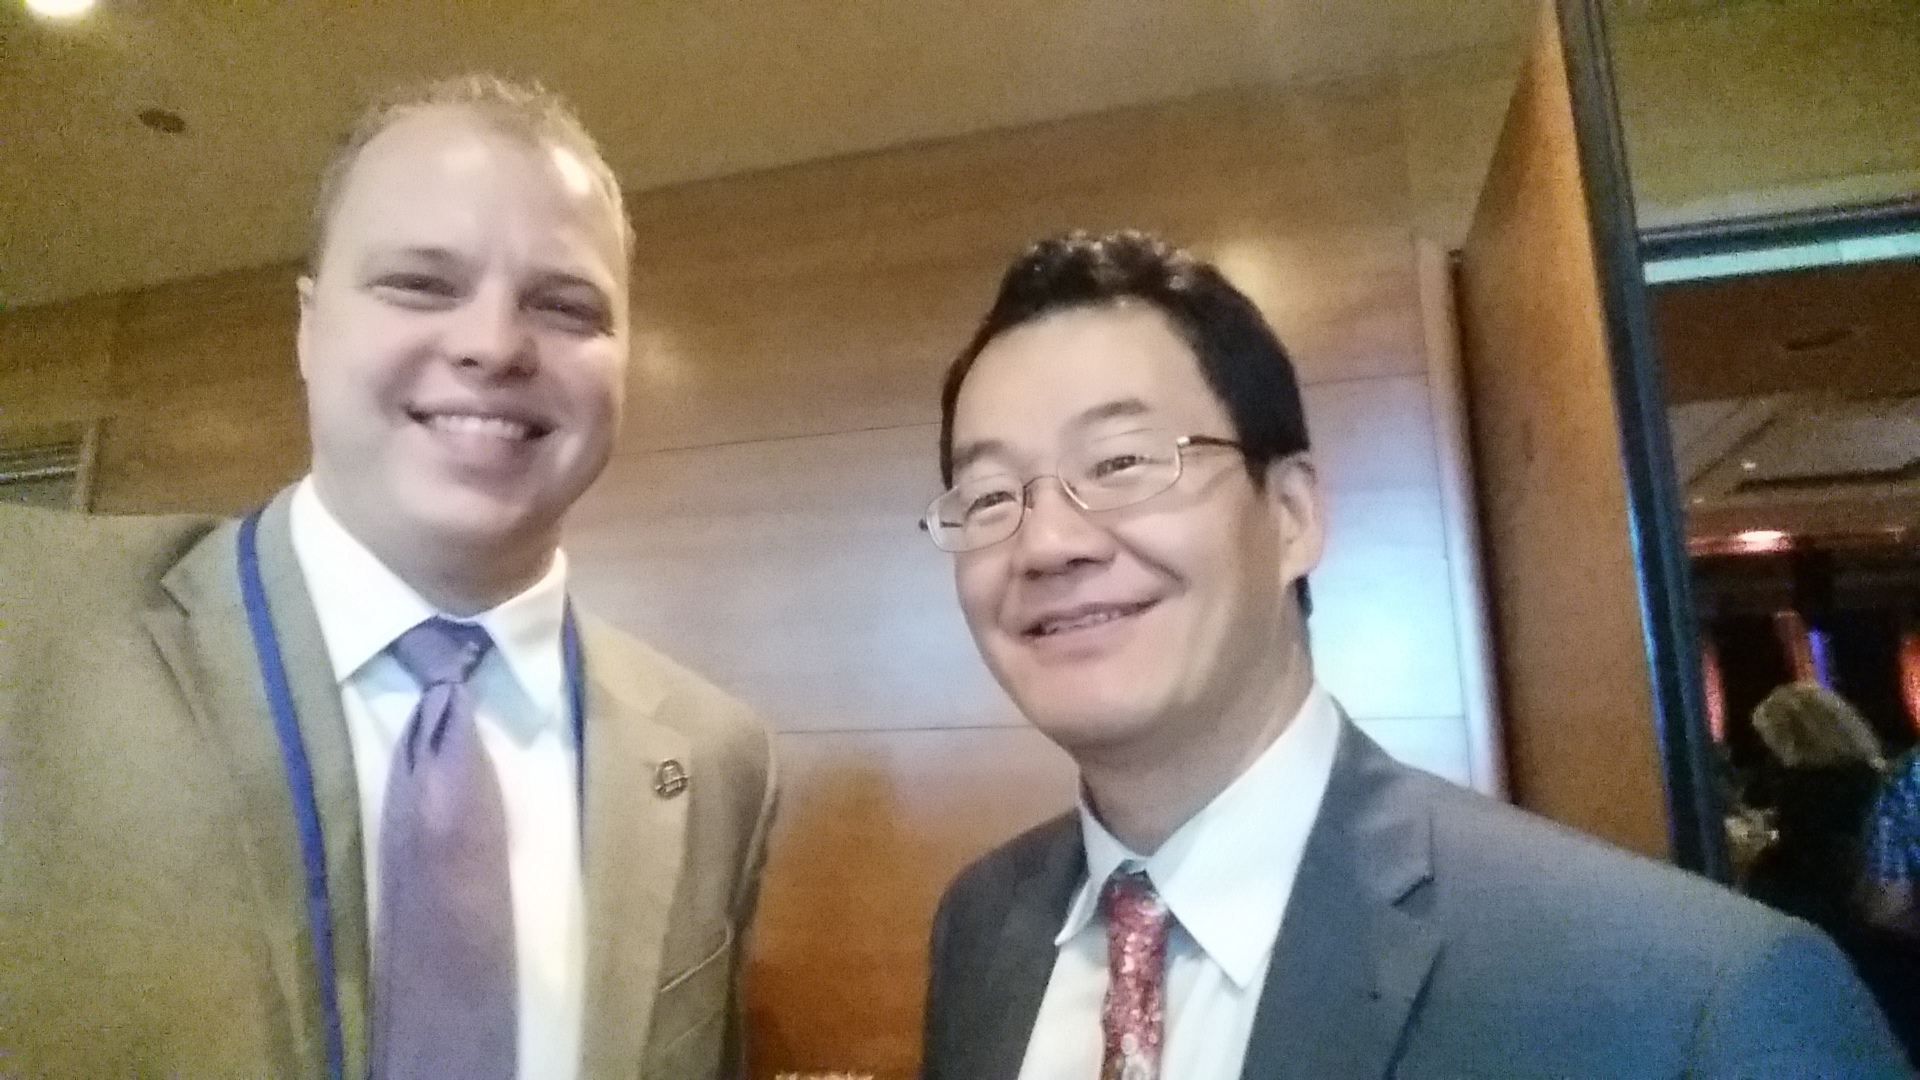 Selfie with NAR Chief Economist Lawrence Yun.